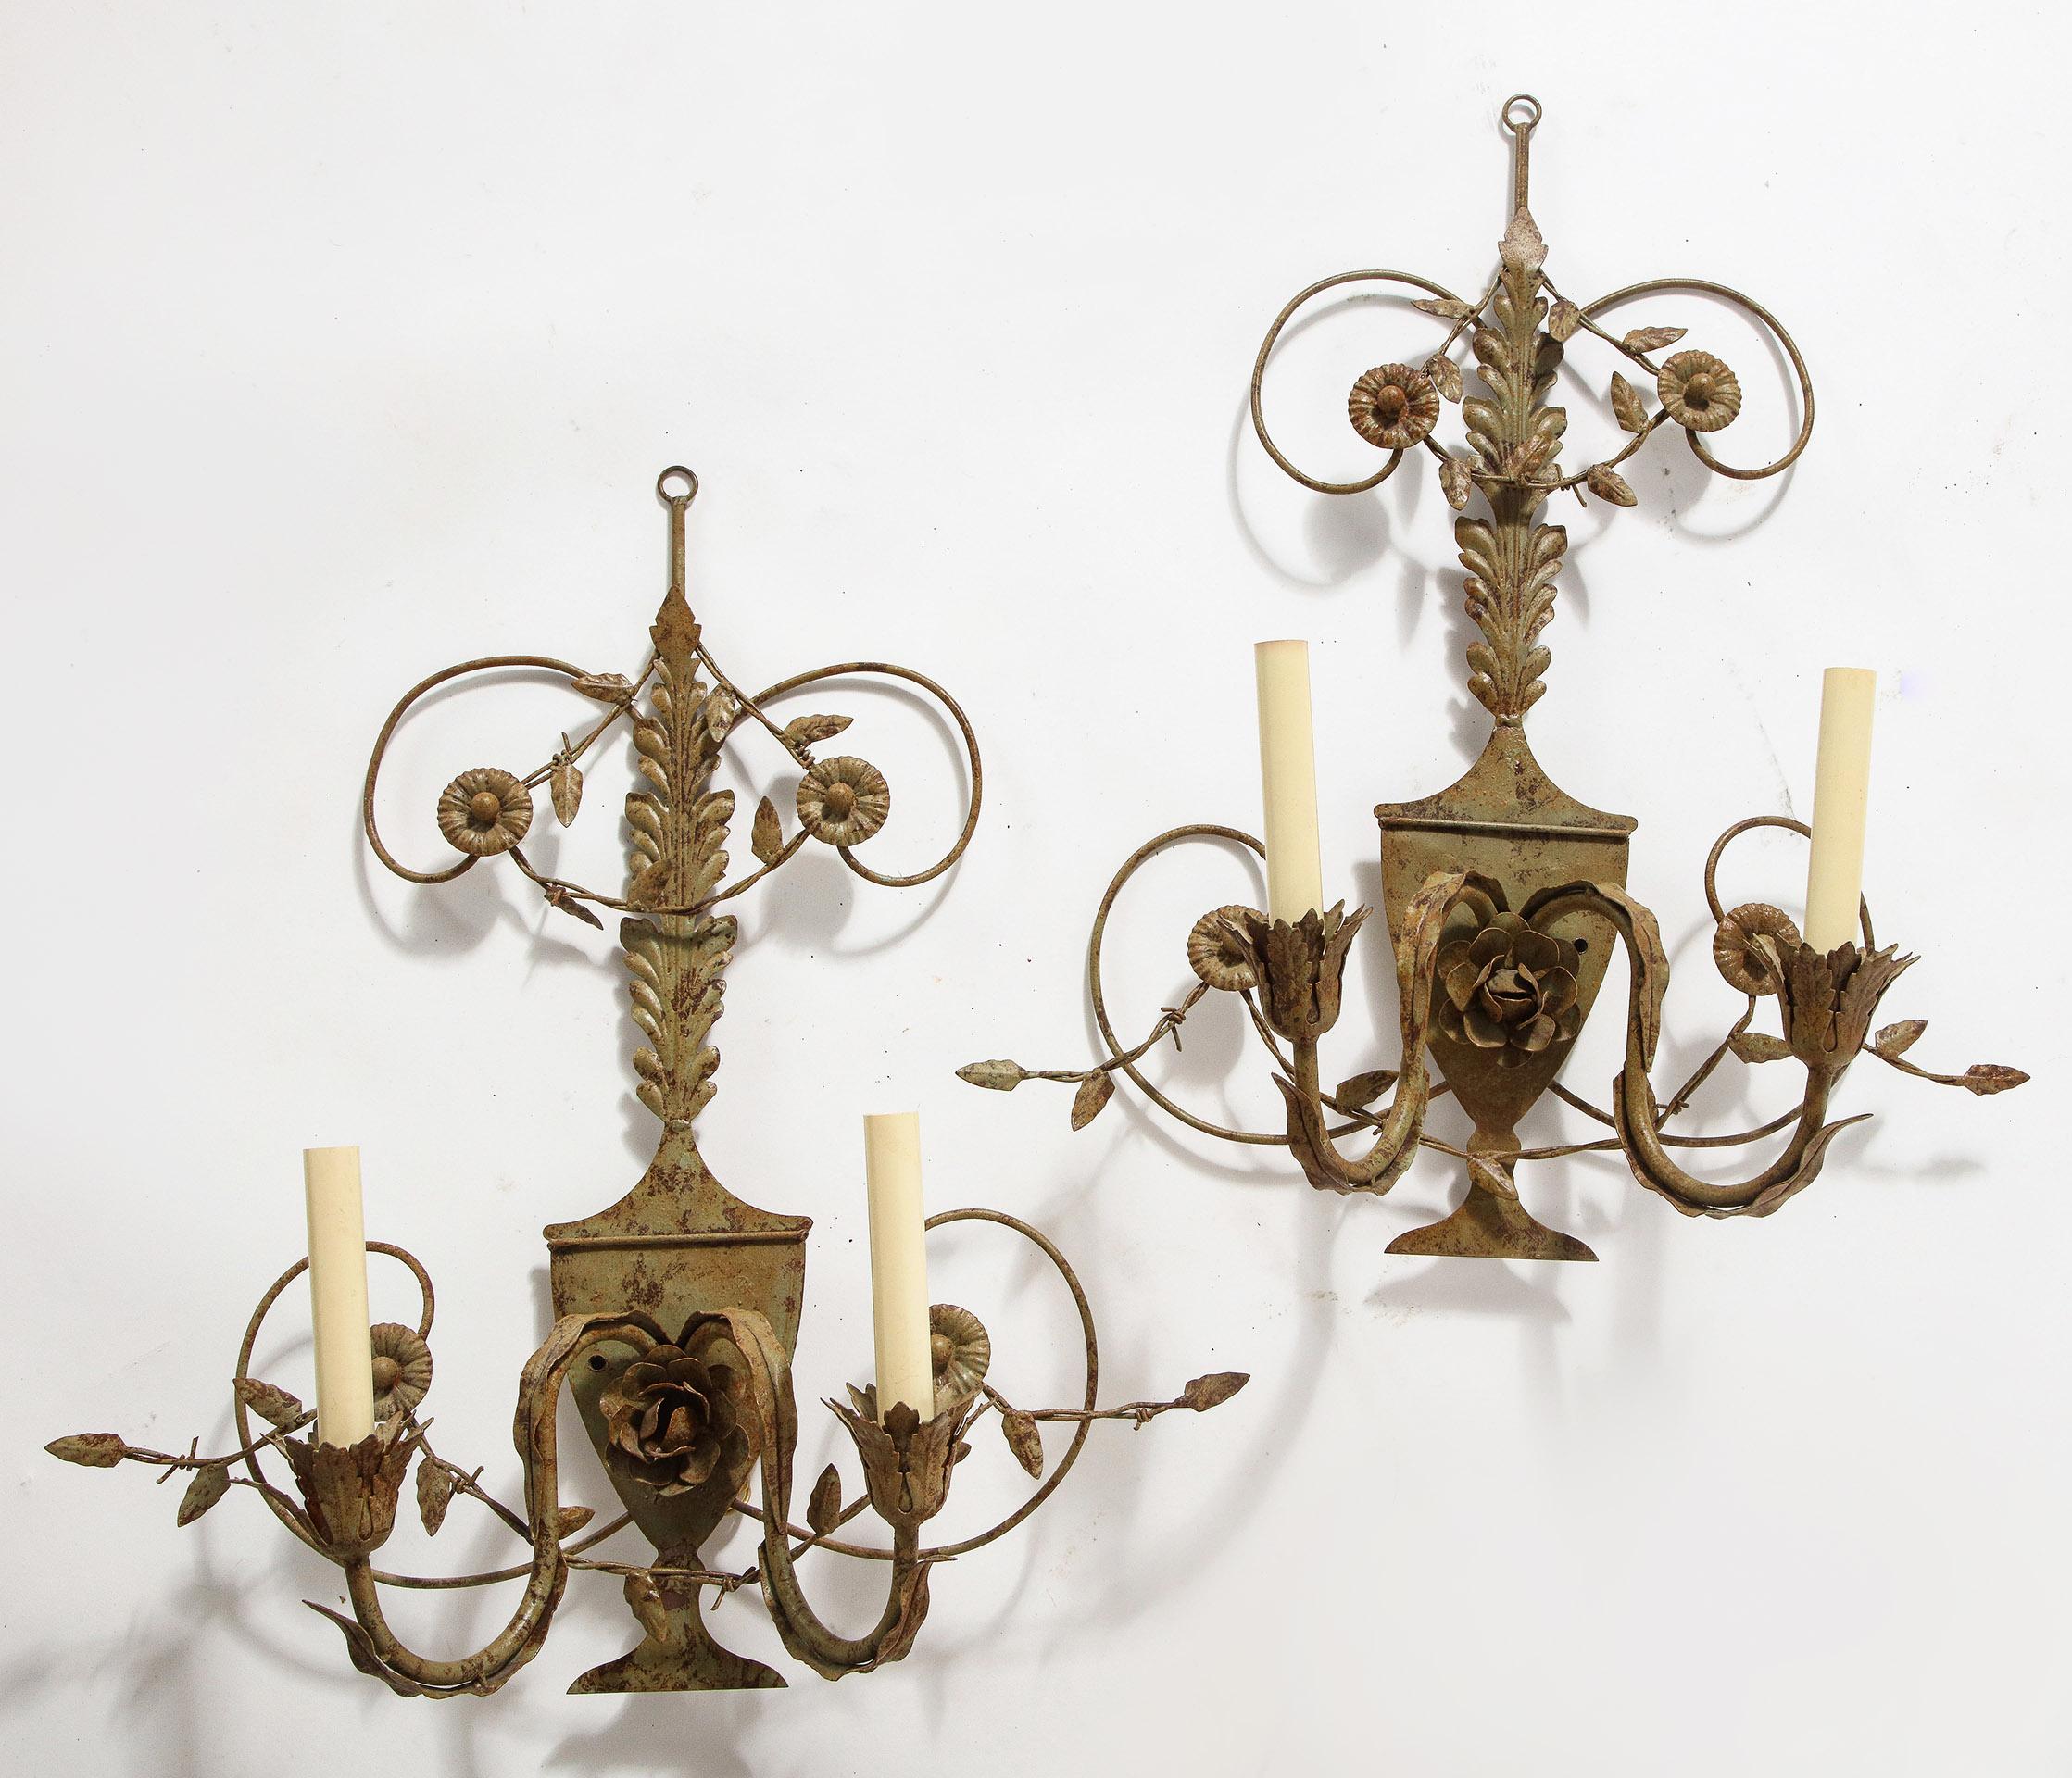 The pair of painted tole 2-light sconces, having an urn form back plate with a stylized floral design above, the back plate supporting 2 floral and leaf decorated candle arms.

electrified.